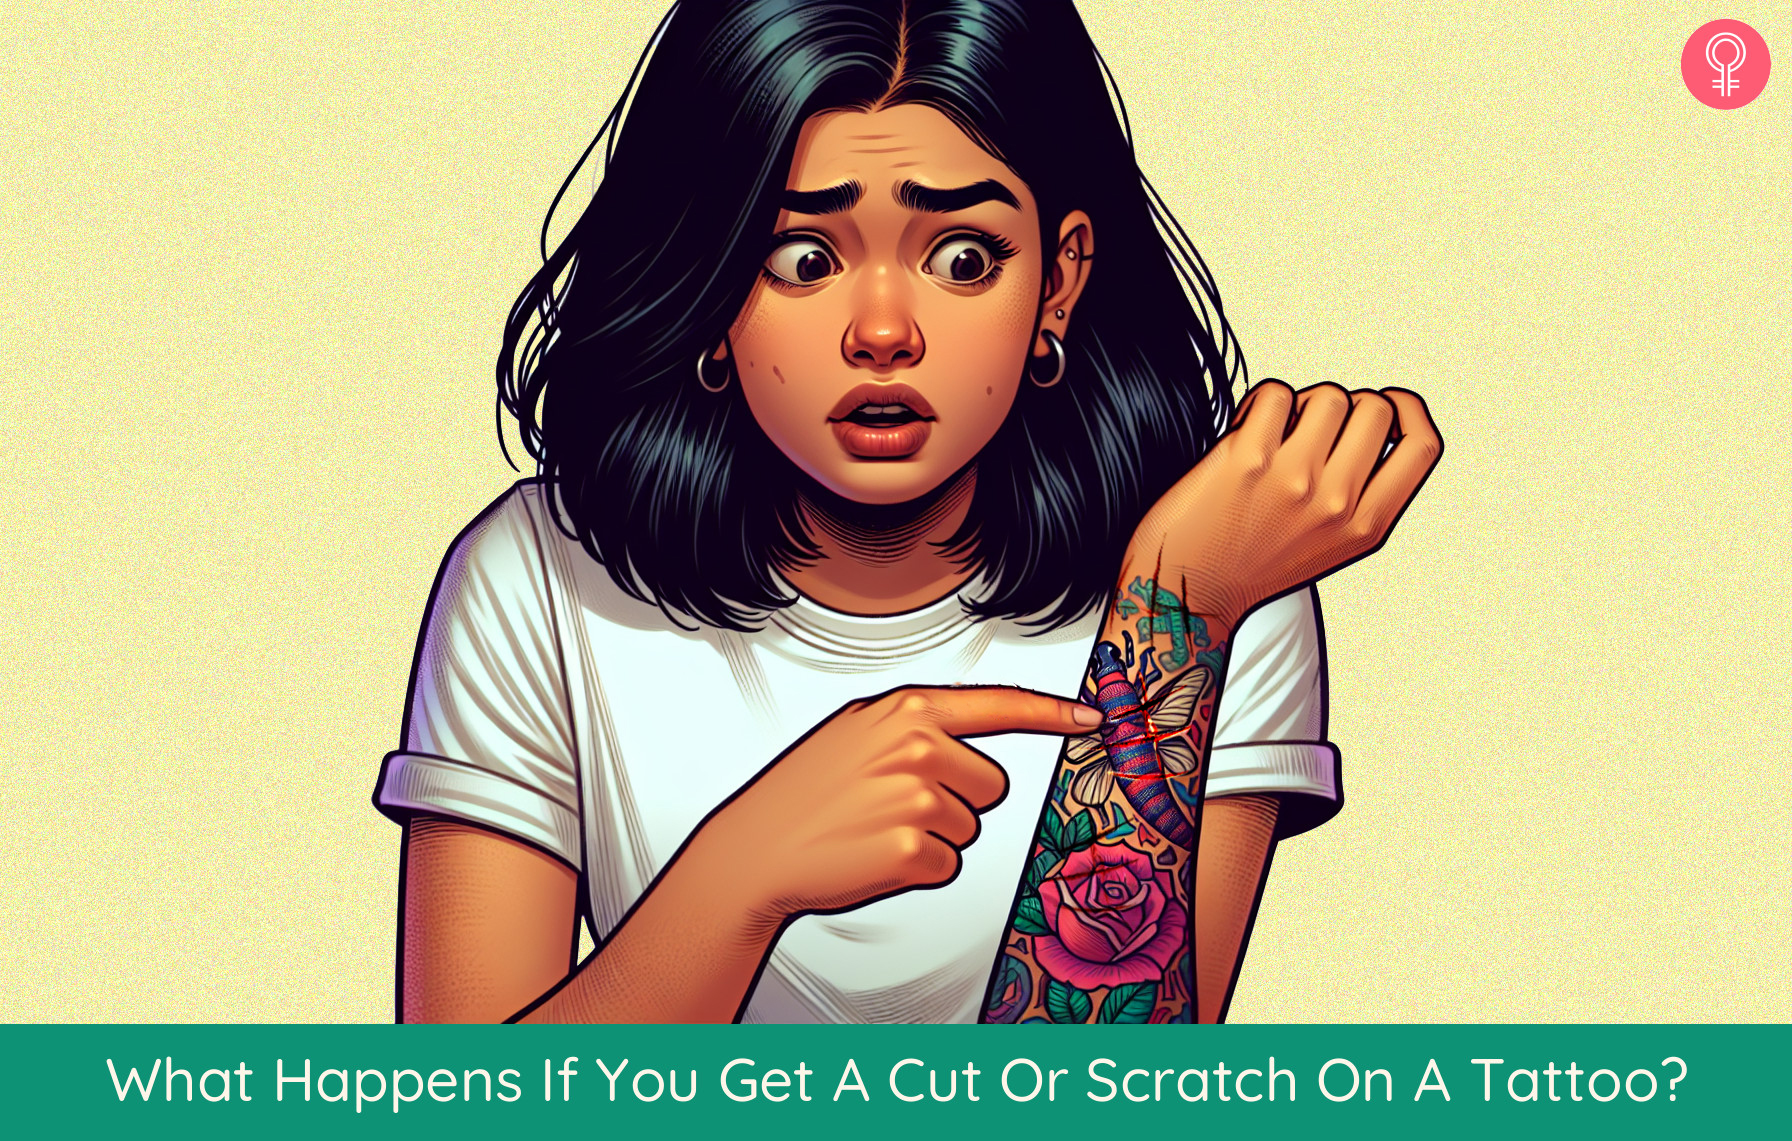 What Happens If You Get A Cut Or Scratch On A Tattoo?